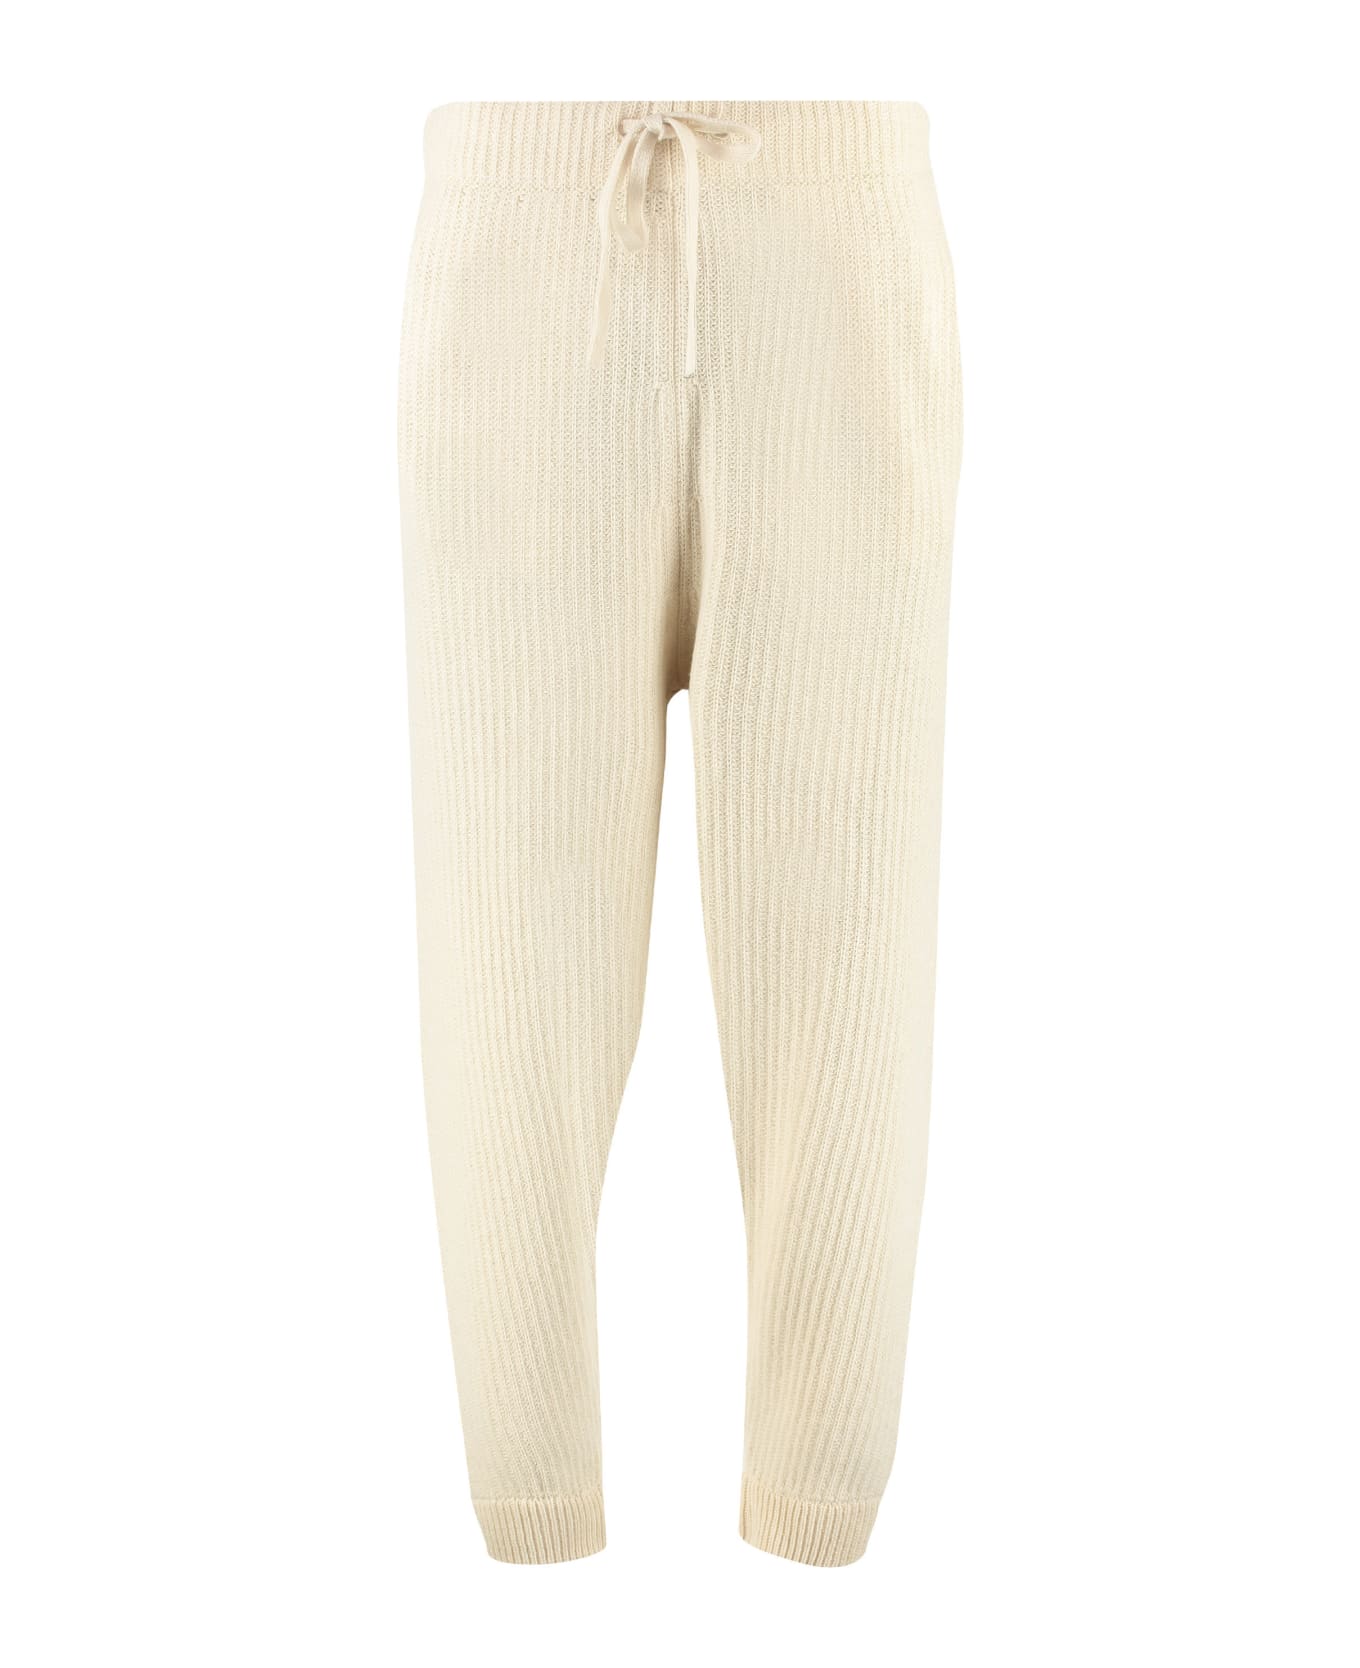 Moncler 2 Moncler 1952 - Rib Knitted Trousers - Ivory スウェットパンツ